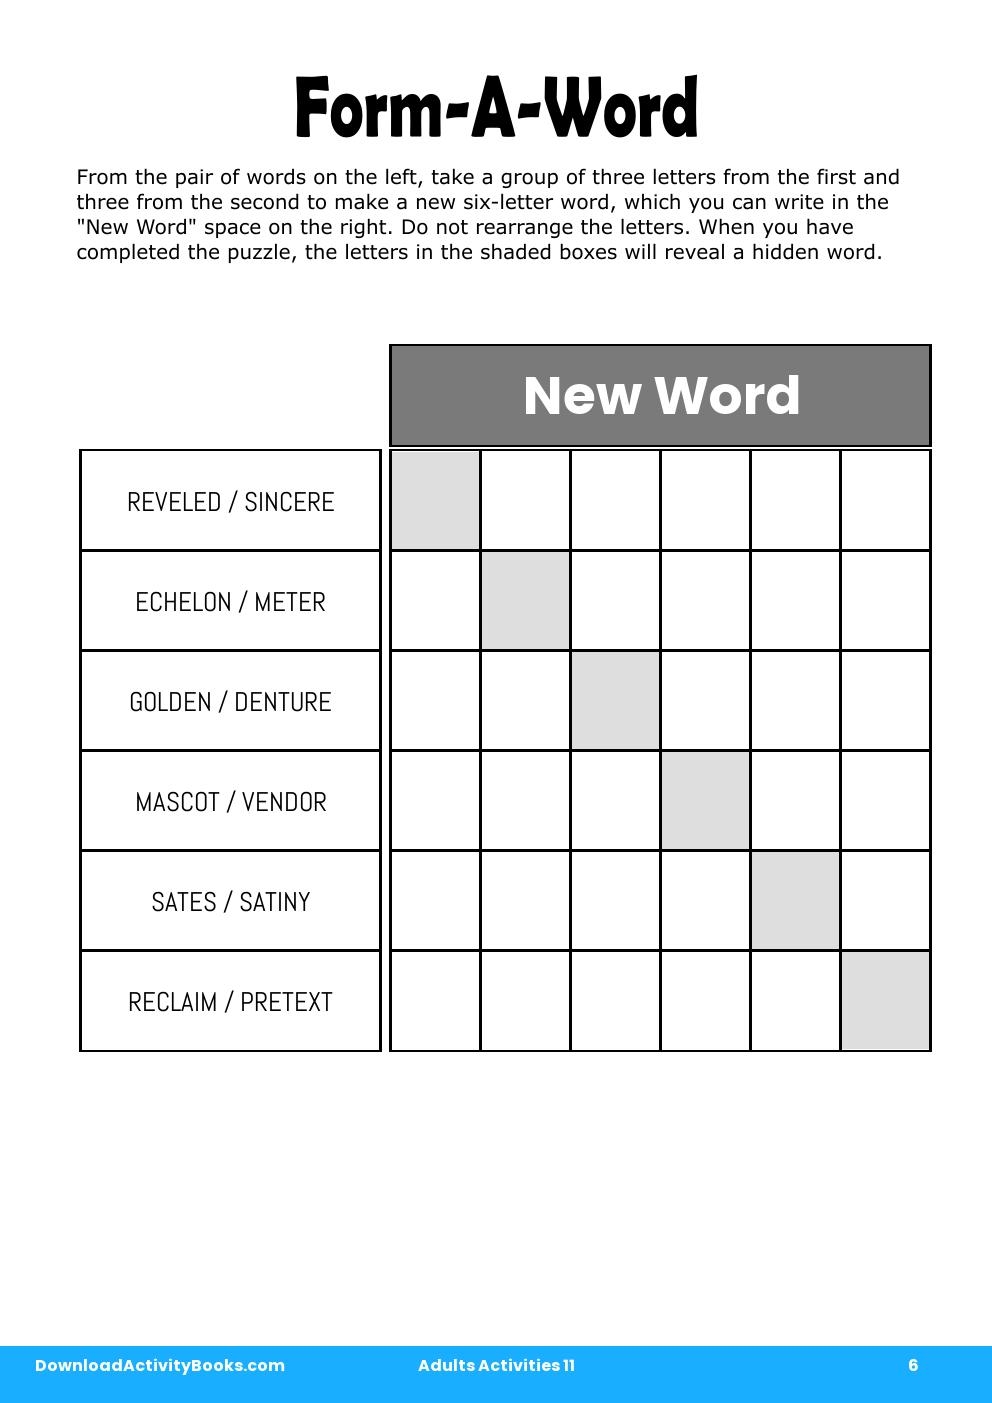 Form-A-Word in Adults Activities 11